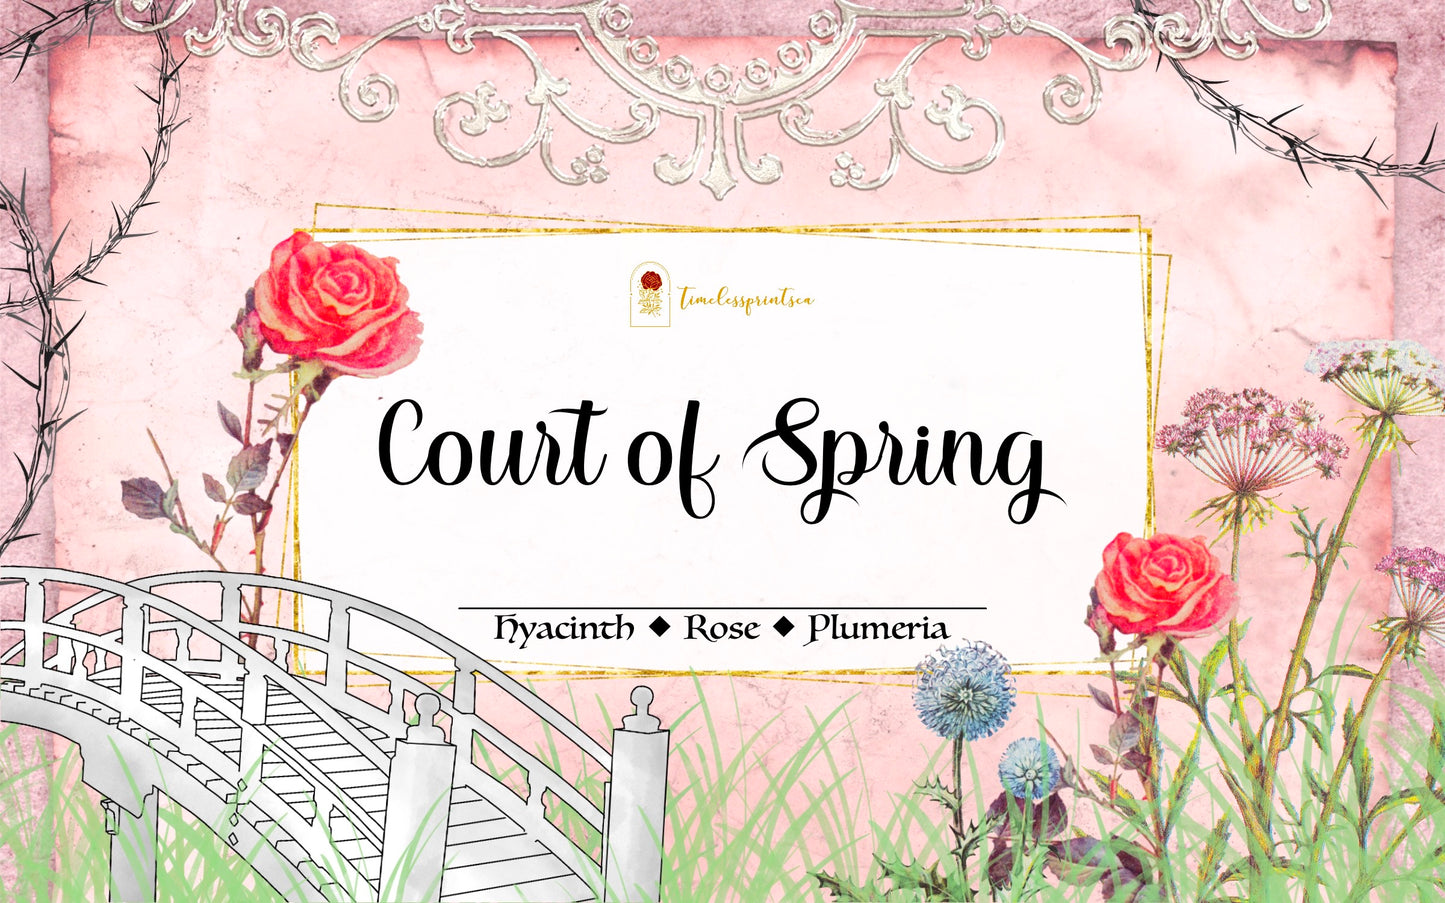 Court of Spring